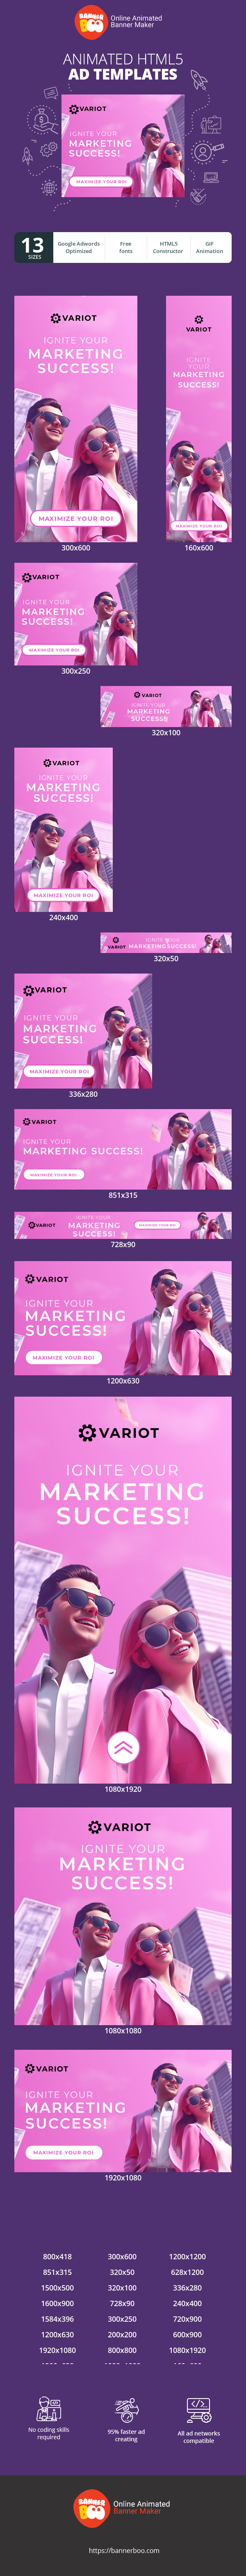 Banner ad template — Ignite Your Marketing Success! — Agencies